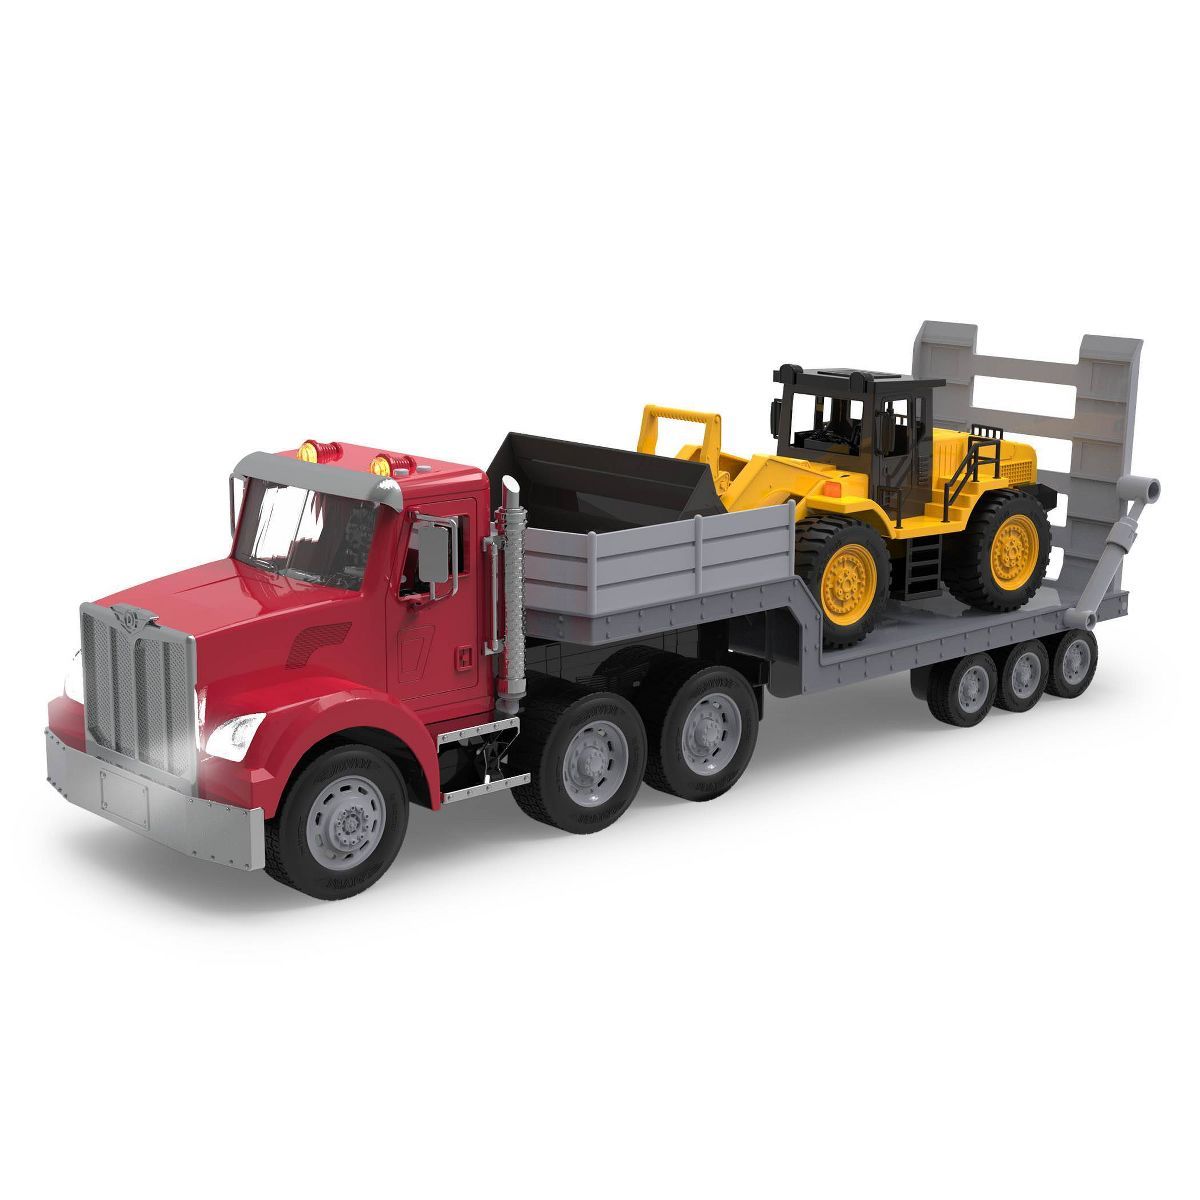 DRIVEN Jumbo Carrier Truck with Midrange vehicle | Target